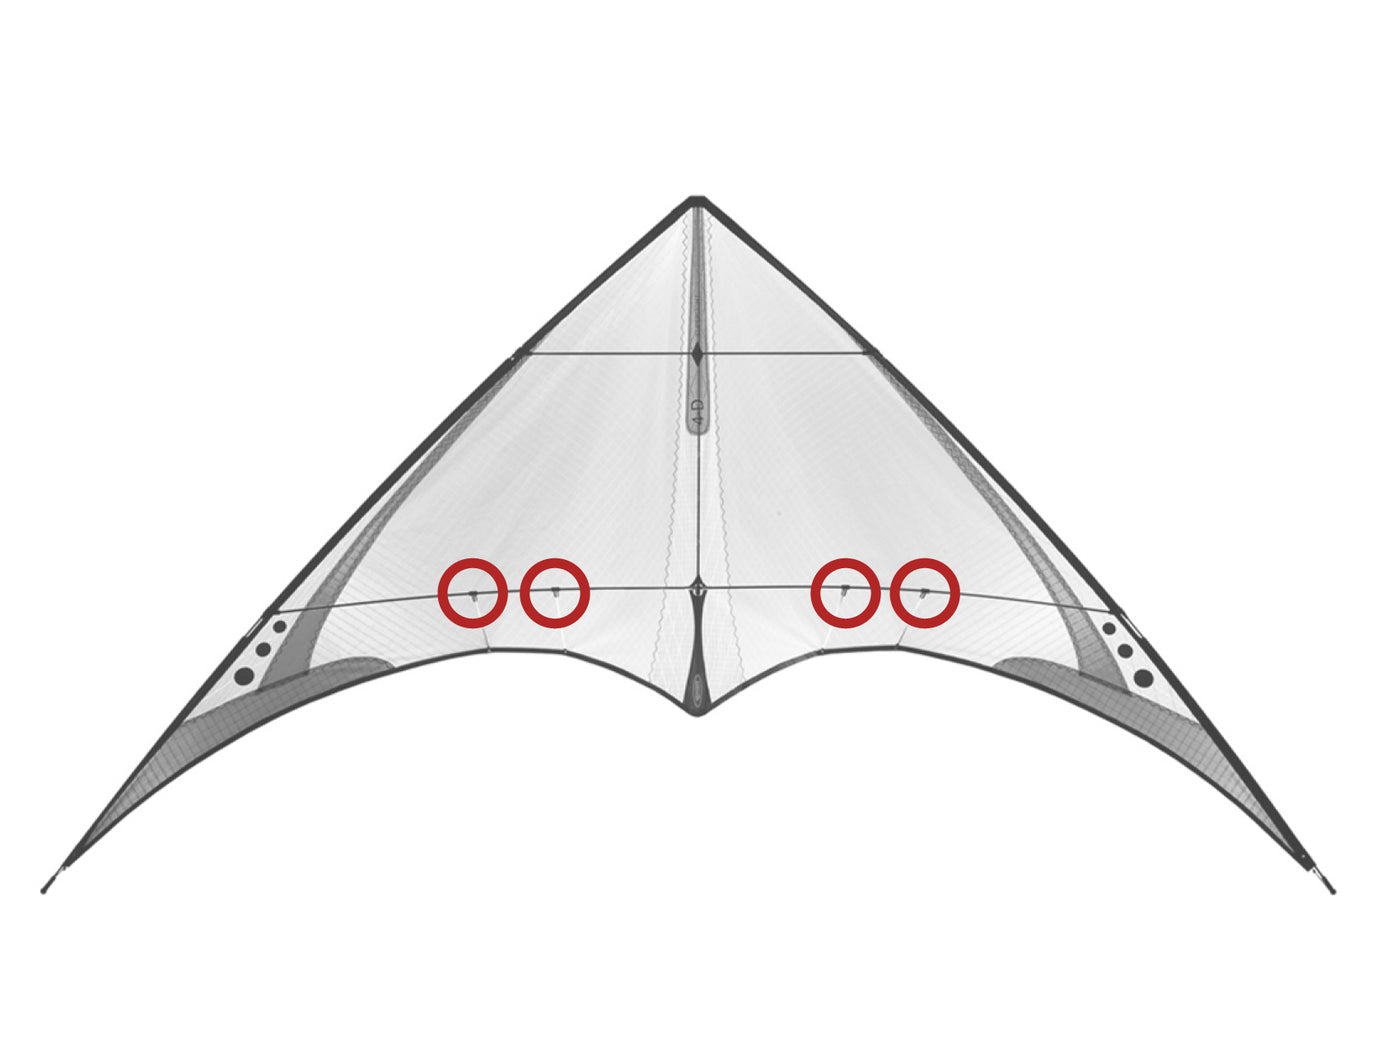 Diagram showing location of the 4-D Standoff Retainer Fittings (set of 4) on the kite.